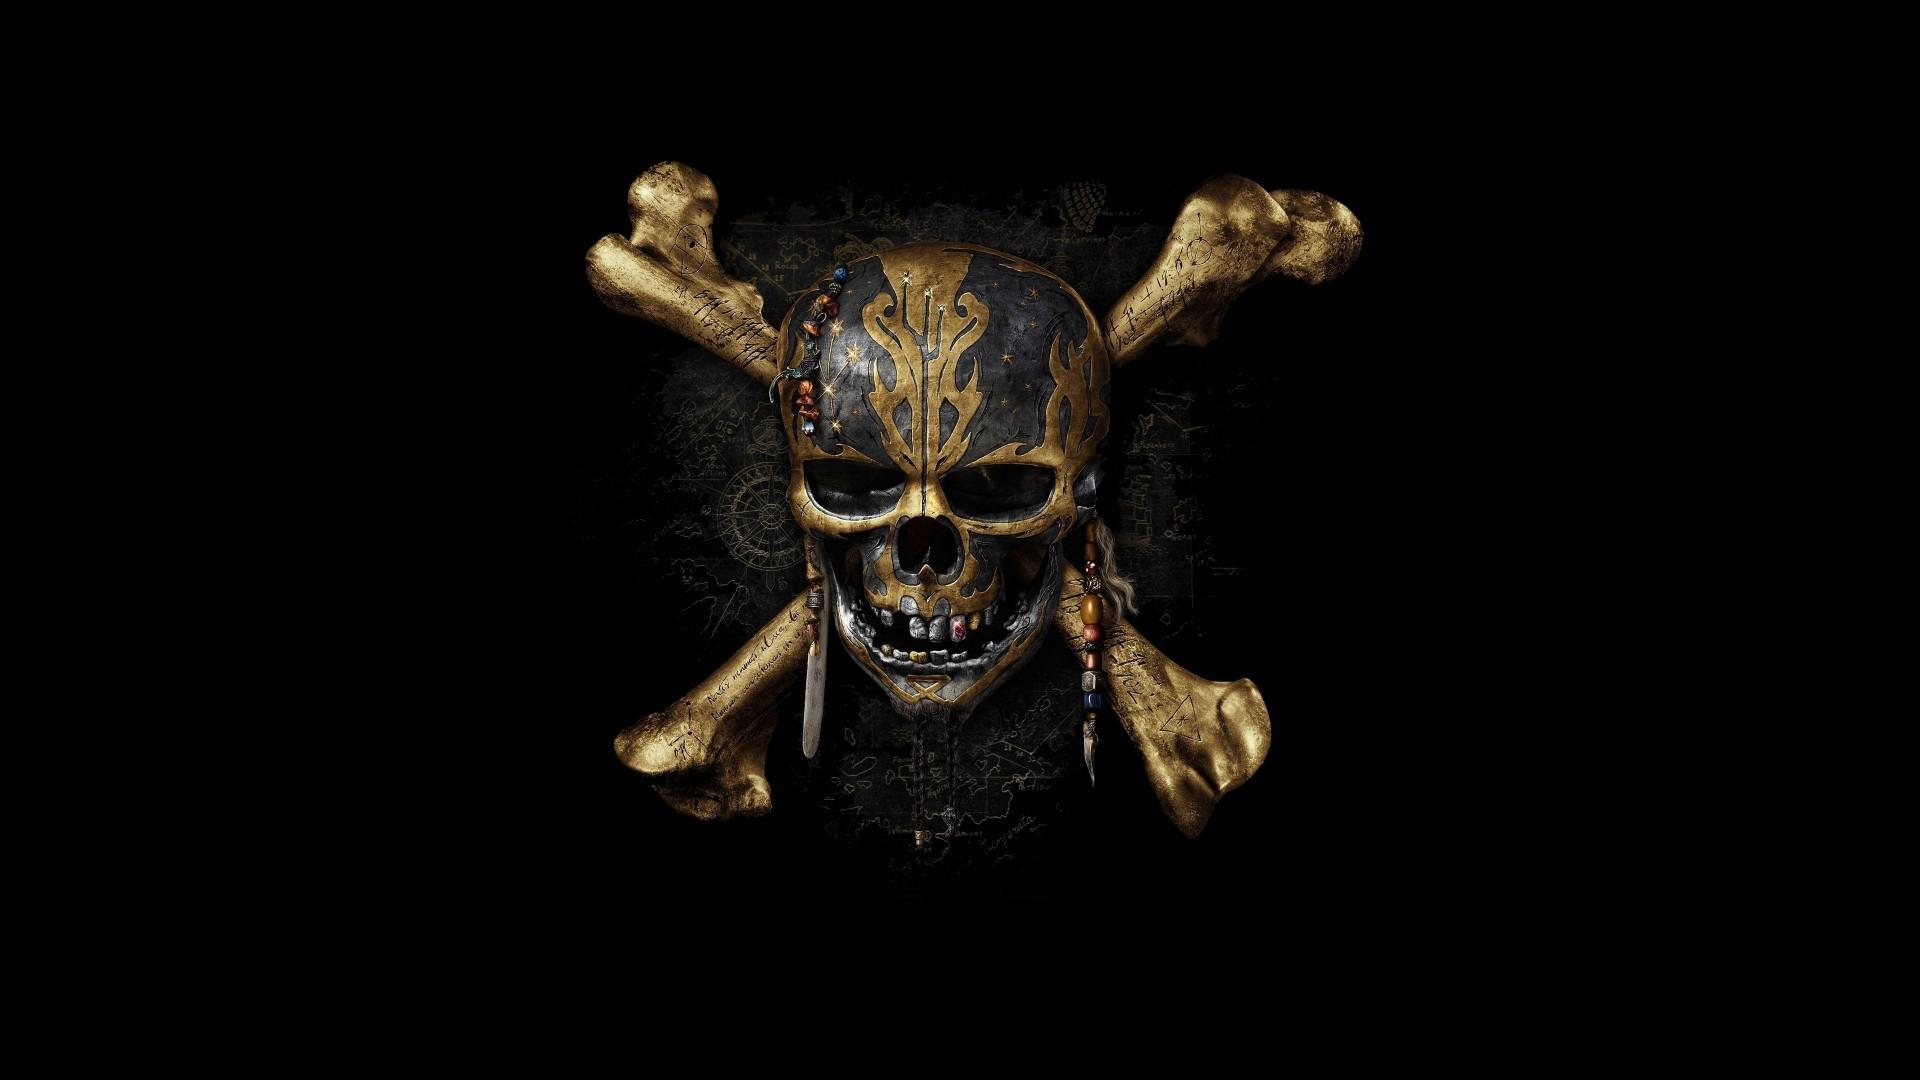 Download 1920x1080 Pirates Of The Caribbean: Dead Men Tell